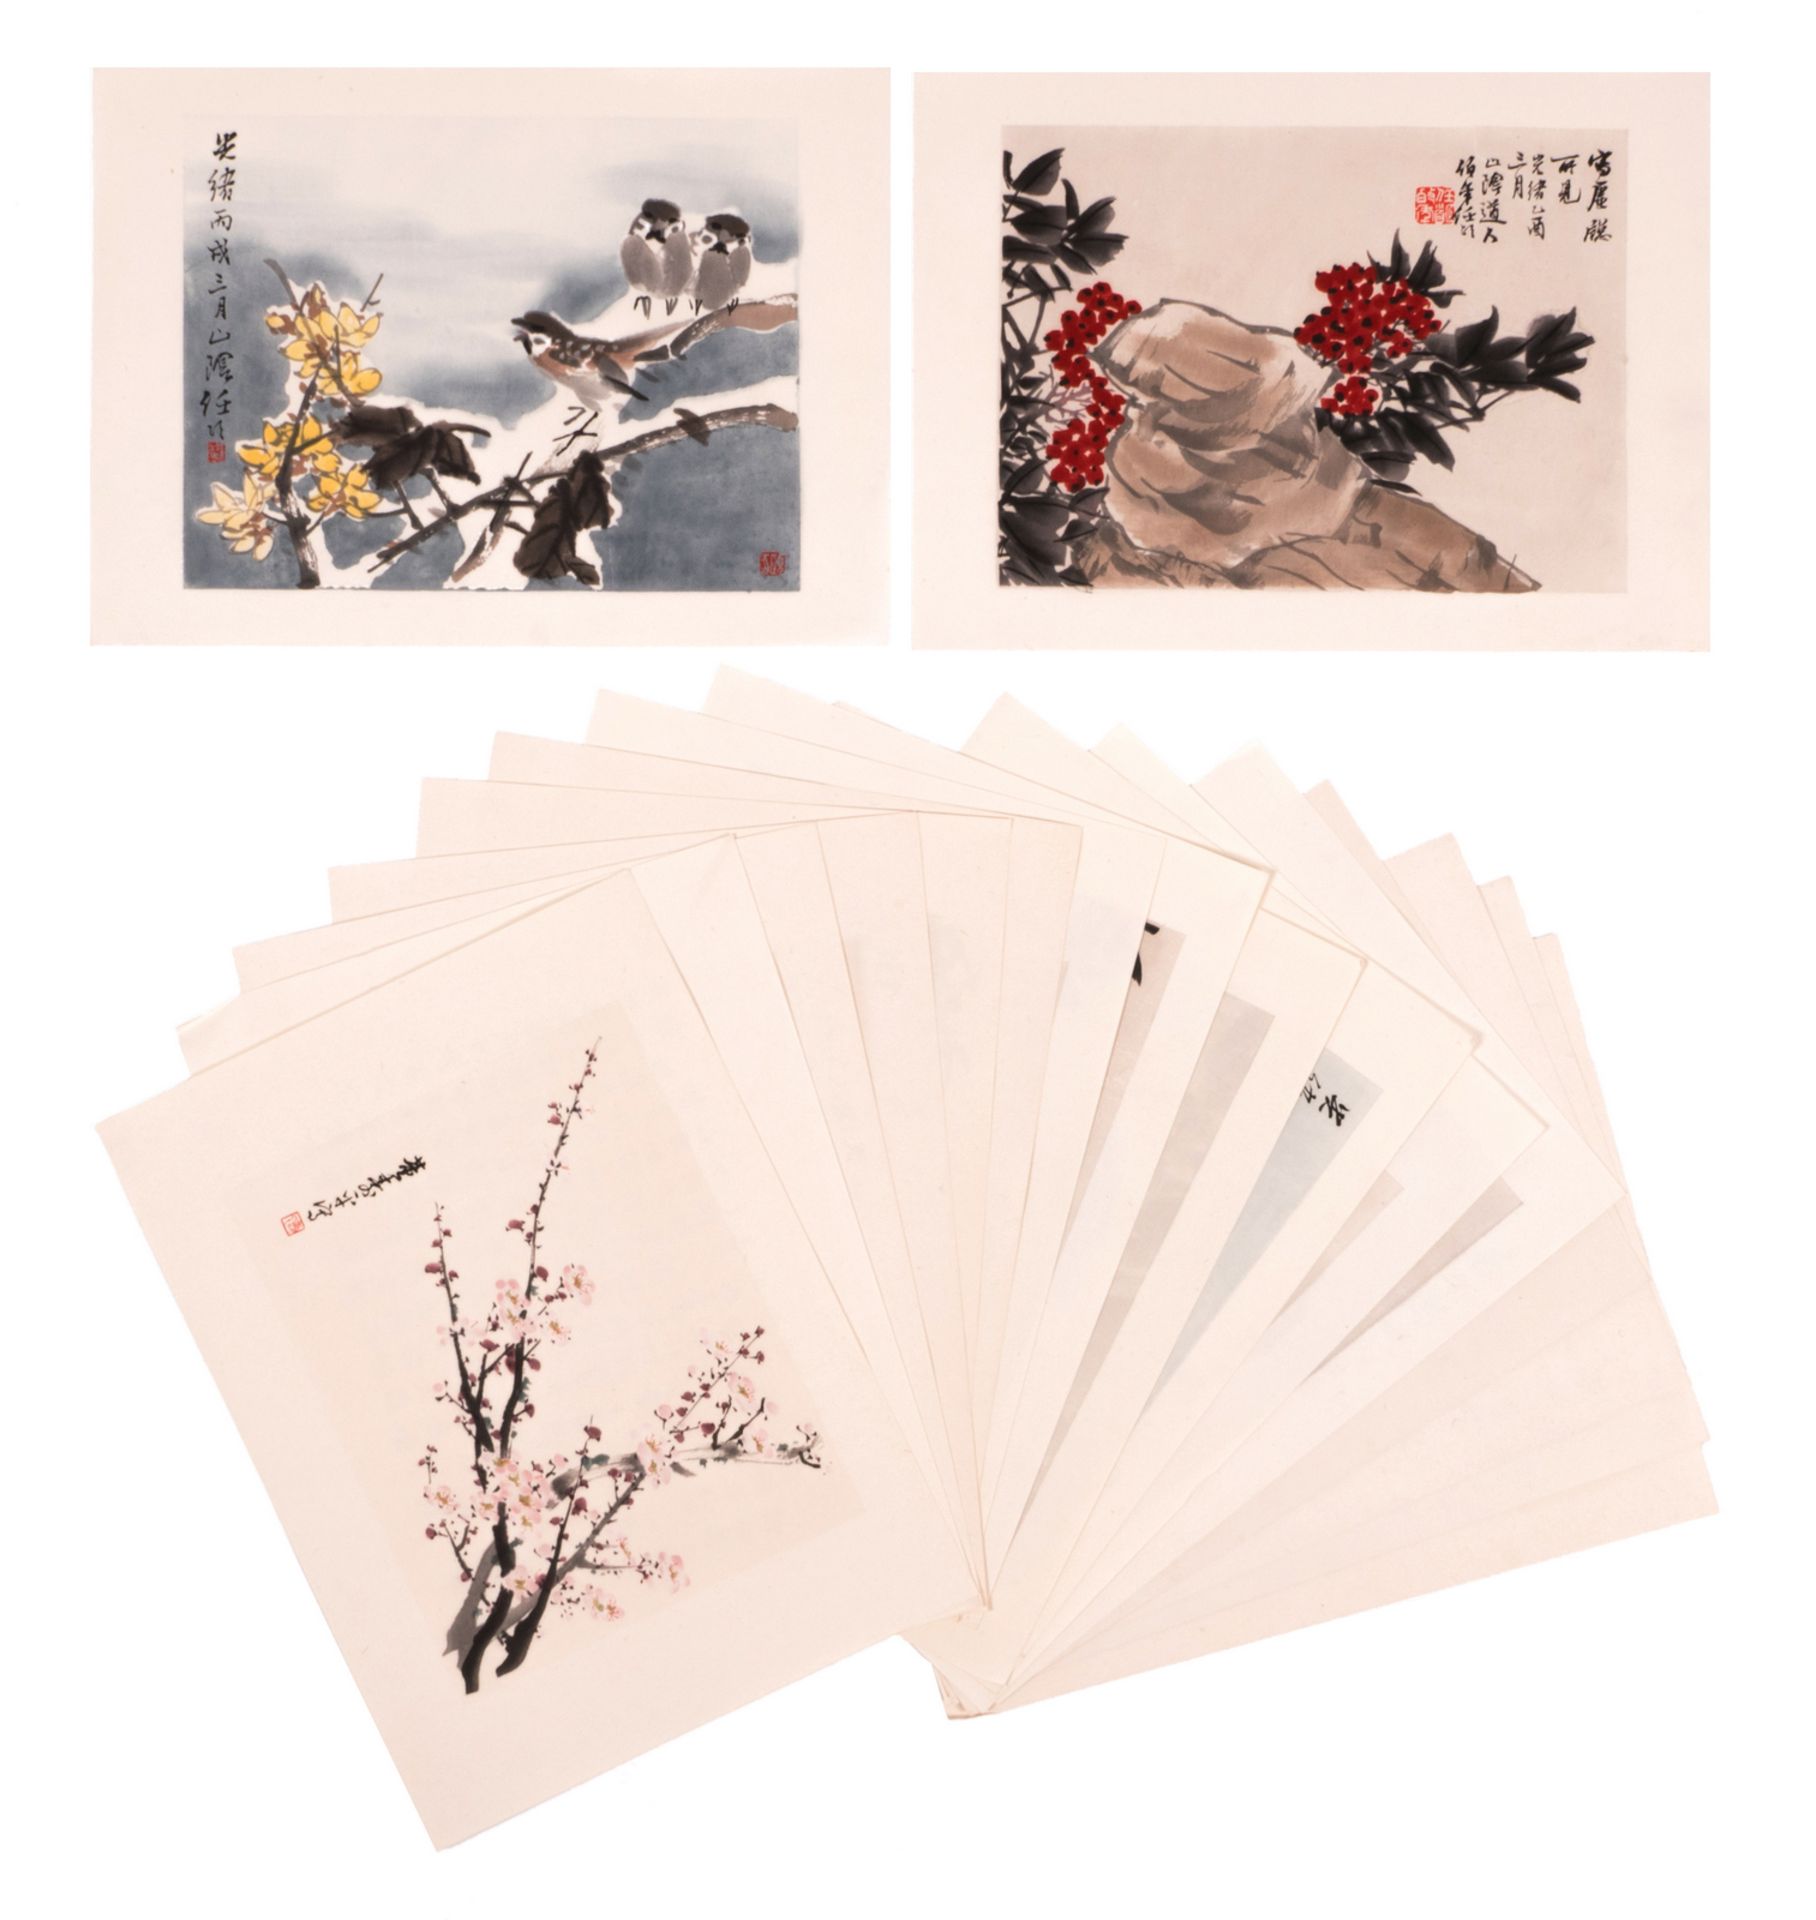 A luxurious art edition with seventeen Chinese (watercolours) + the frontispiece with calligraphic